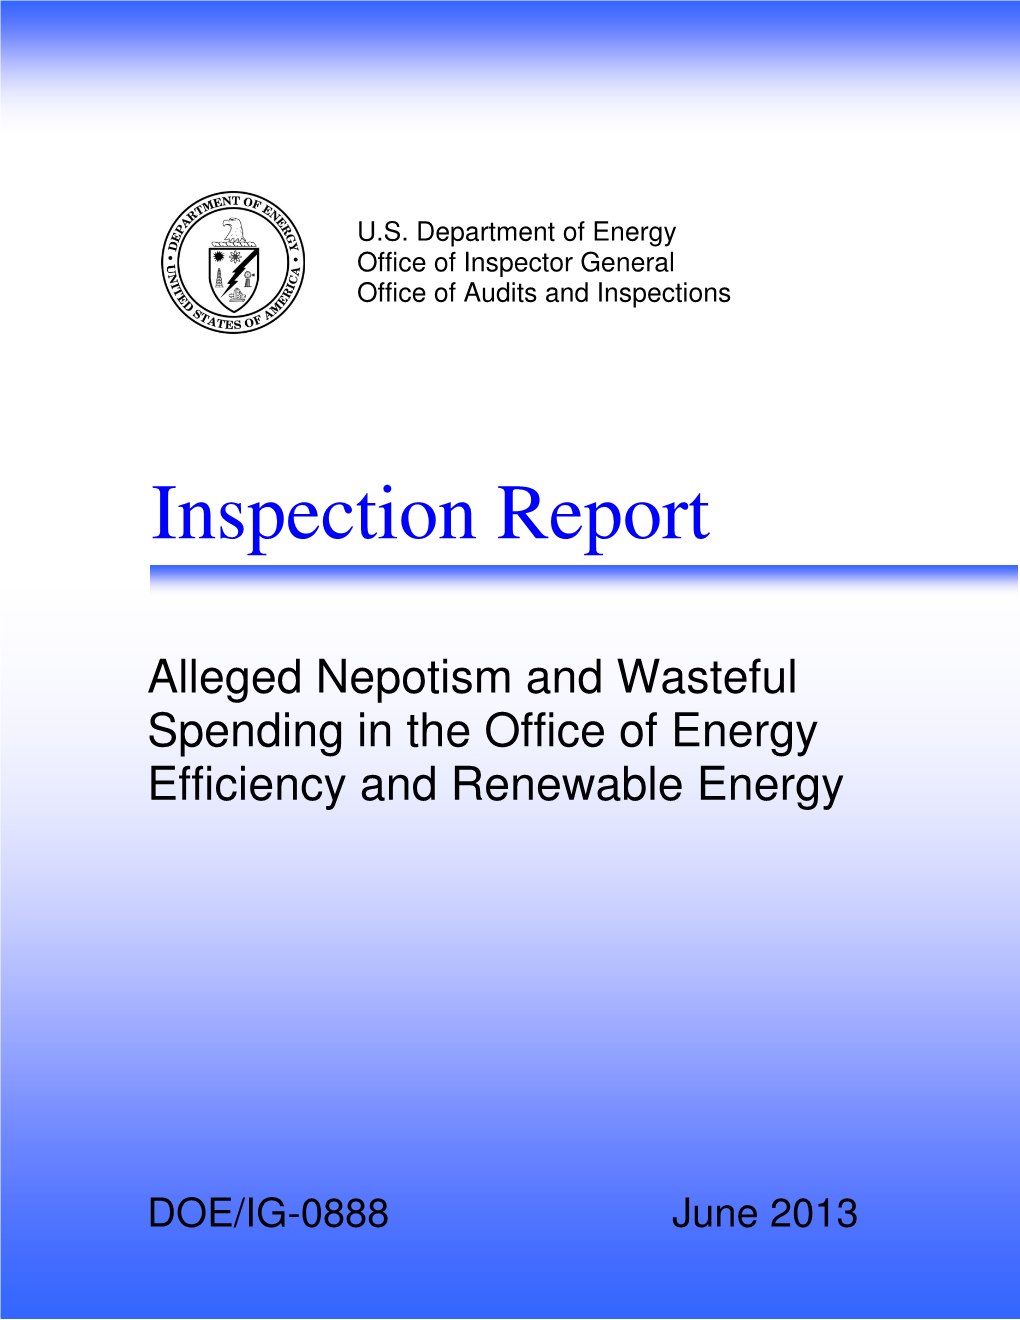 Alleged Nepotism and Wasteful Spending in the Office of Energy Efficiency and Renewable Energy"